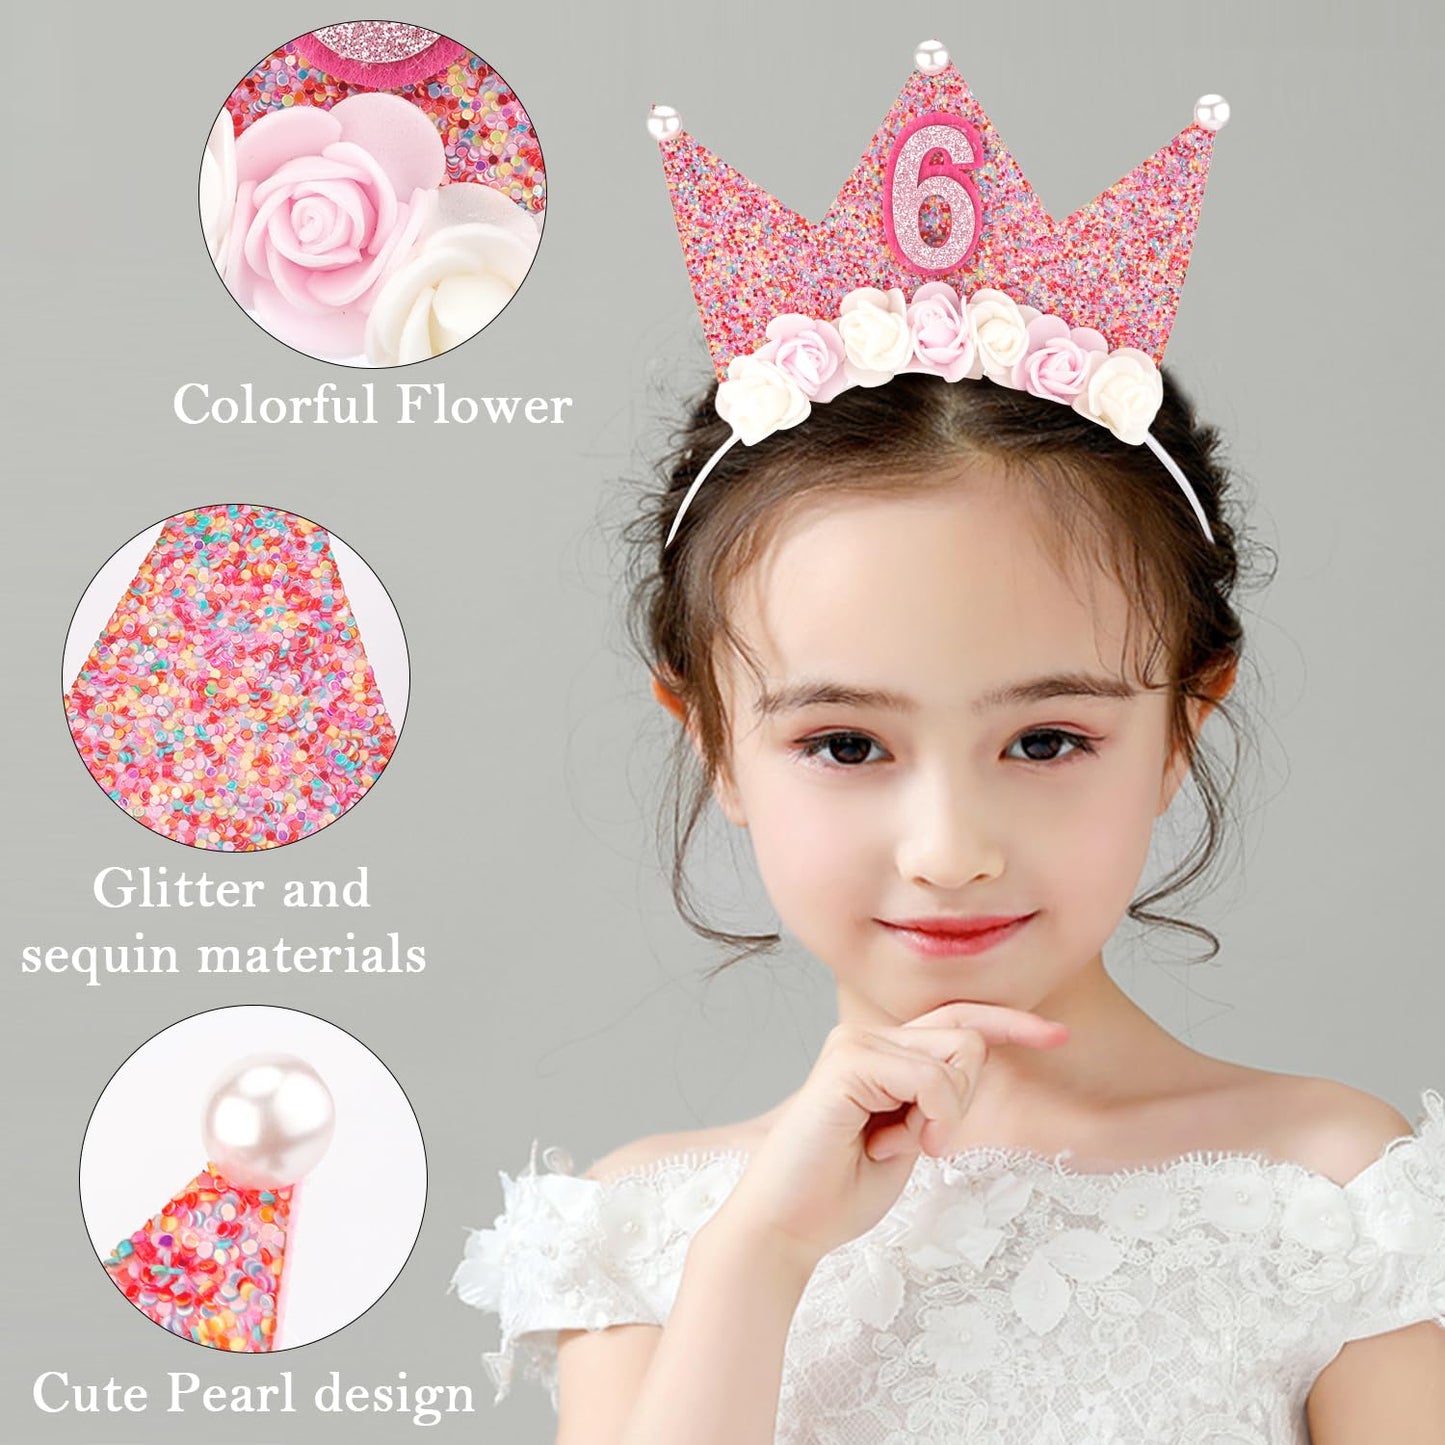 SuPoo 6th Birthday Decorations for Girl 6th Birthday Girl Headband Birthday Crown for Girls Glitter Hair Band for Party 6 Year Old Happy Birthday Decorations Flower Princess Tiara Hair Accessory